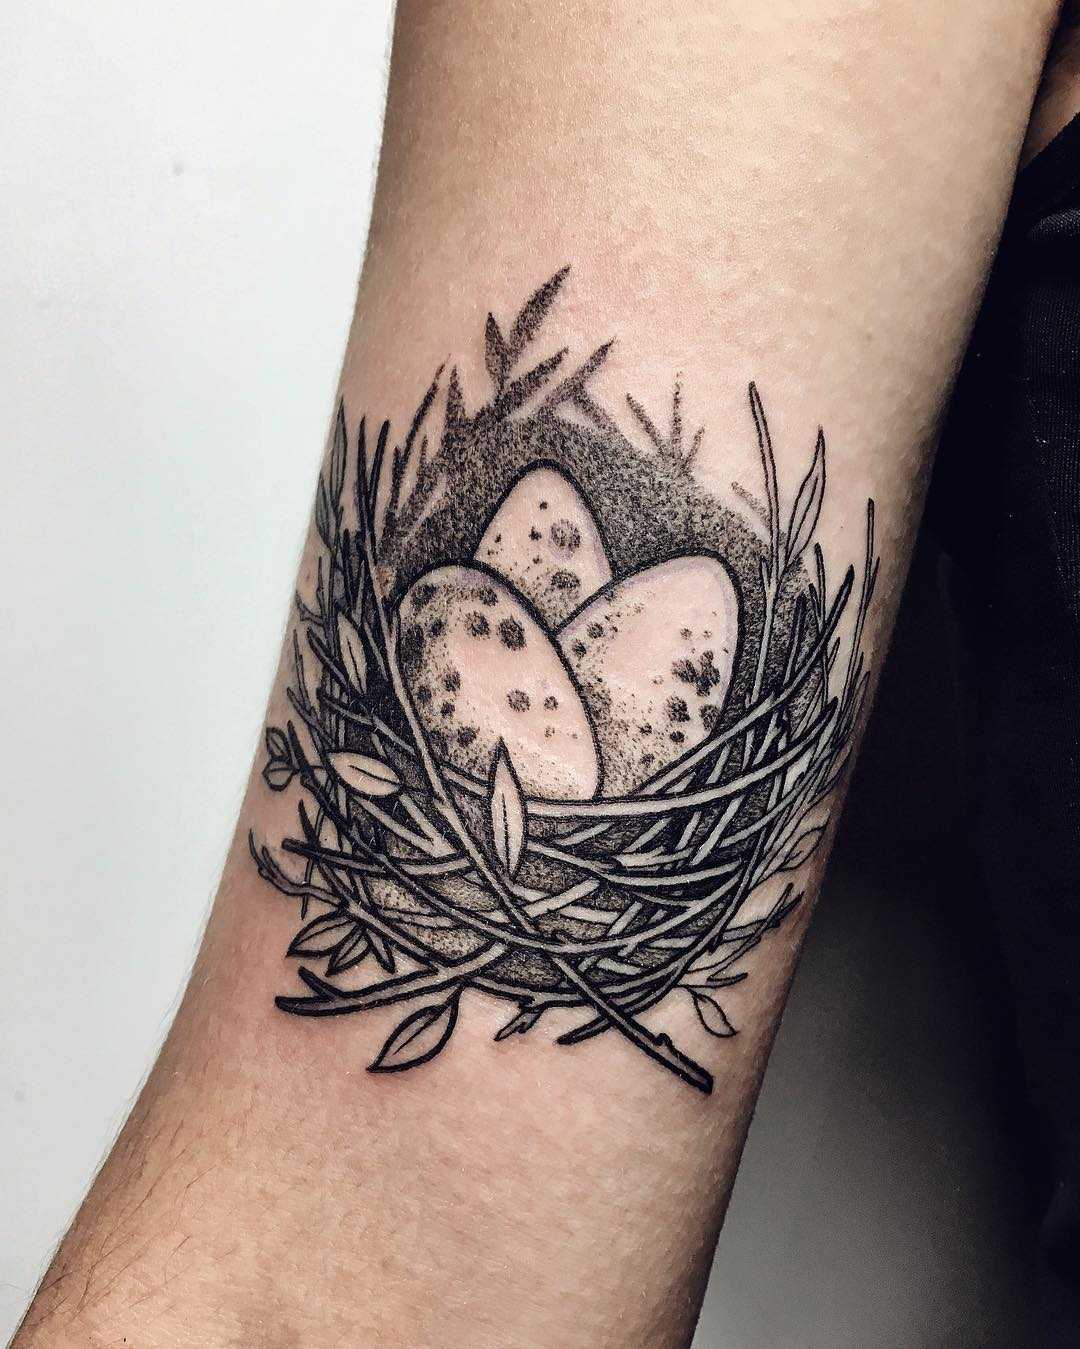 spaniard_tattoos thigh tattoo done the other day Reminds me of my favorite  breakfast item, egg in a nest. And yes @maggie_mays_art it's egg in a nest....  | By Carbon Ink TattooFacebook